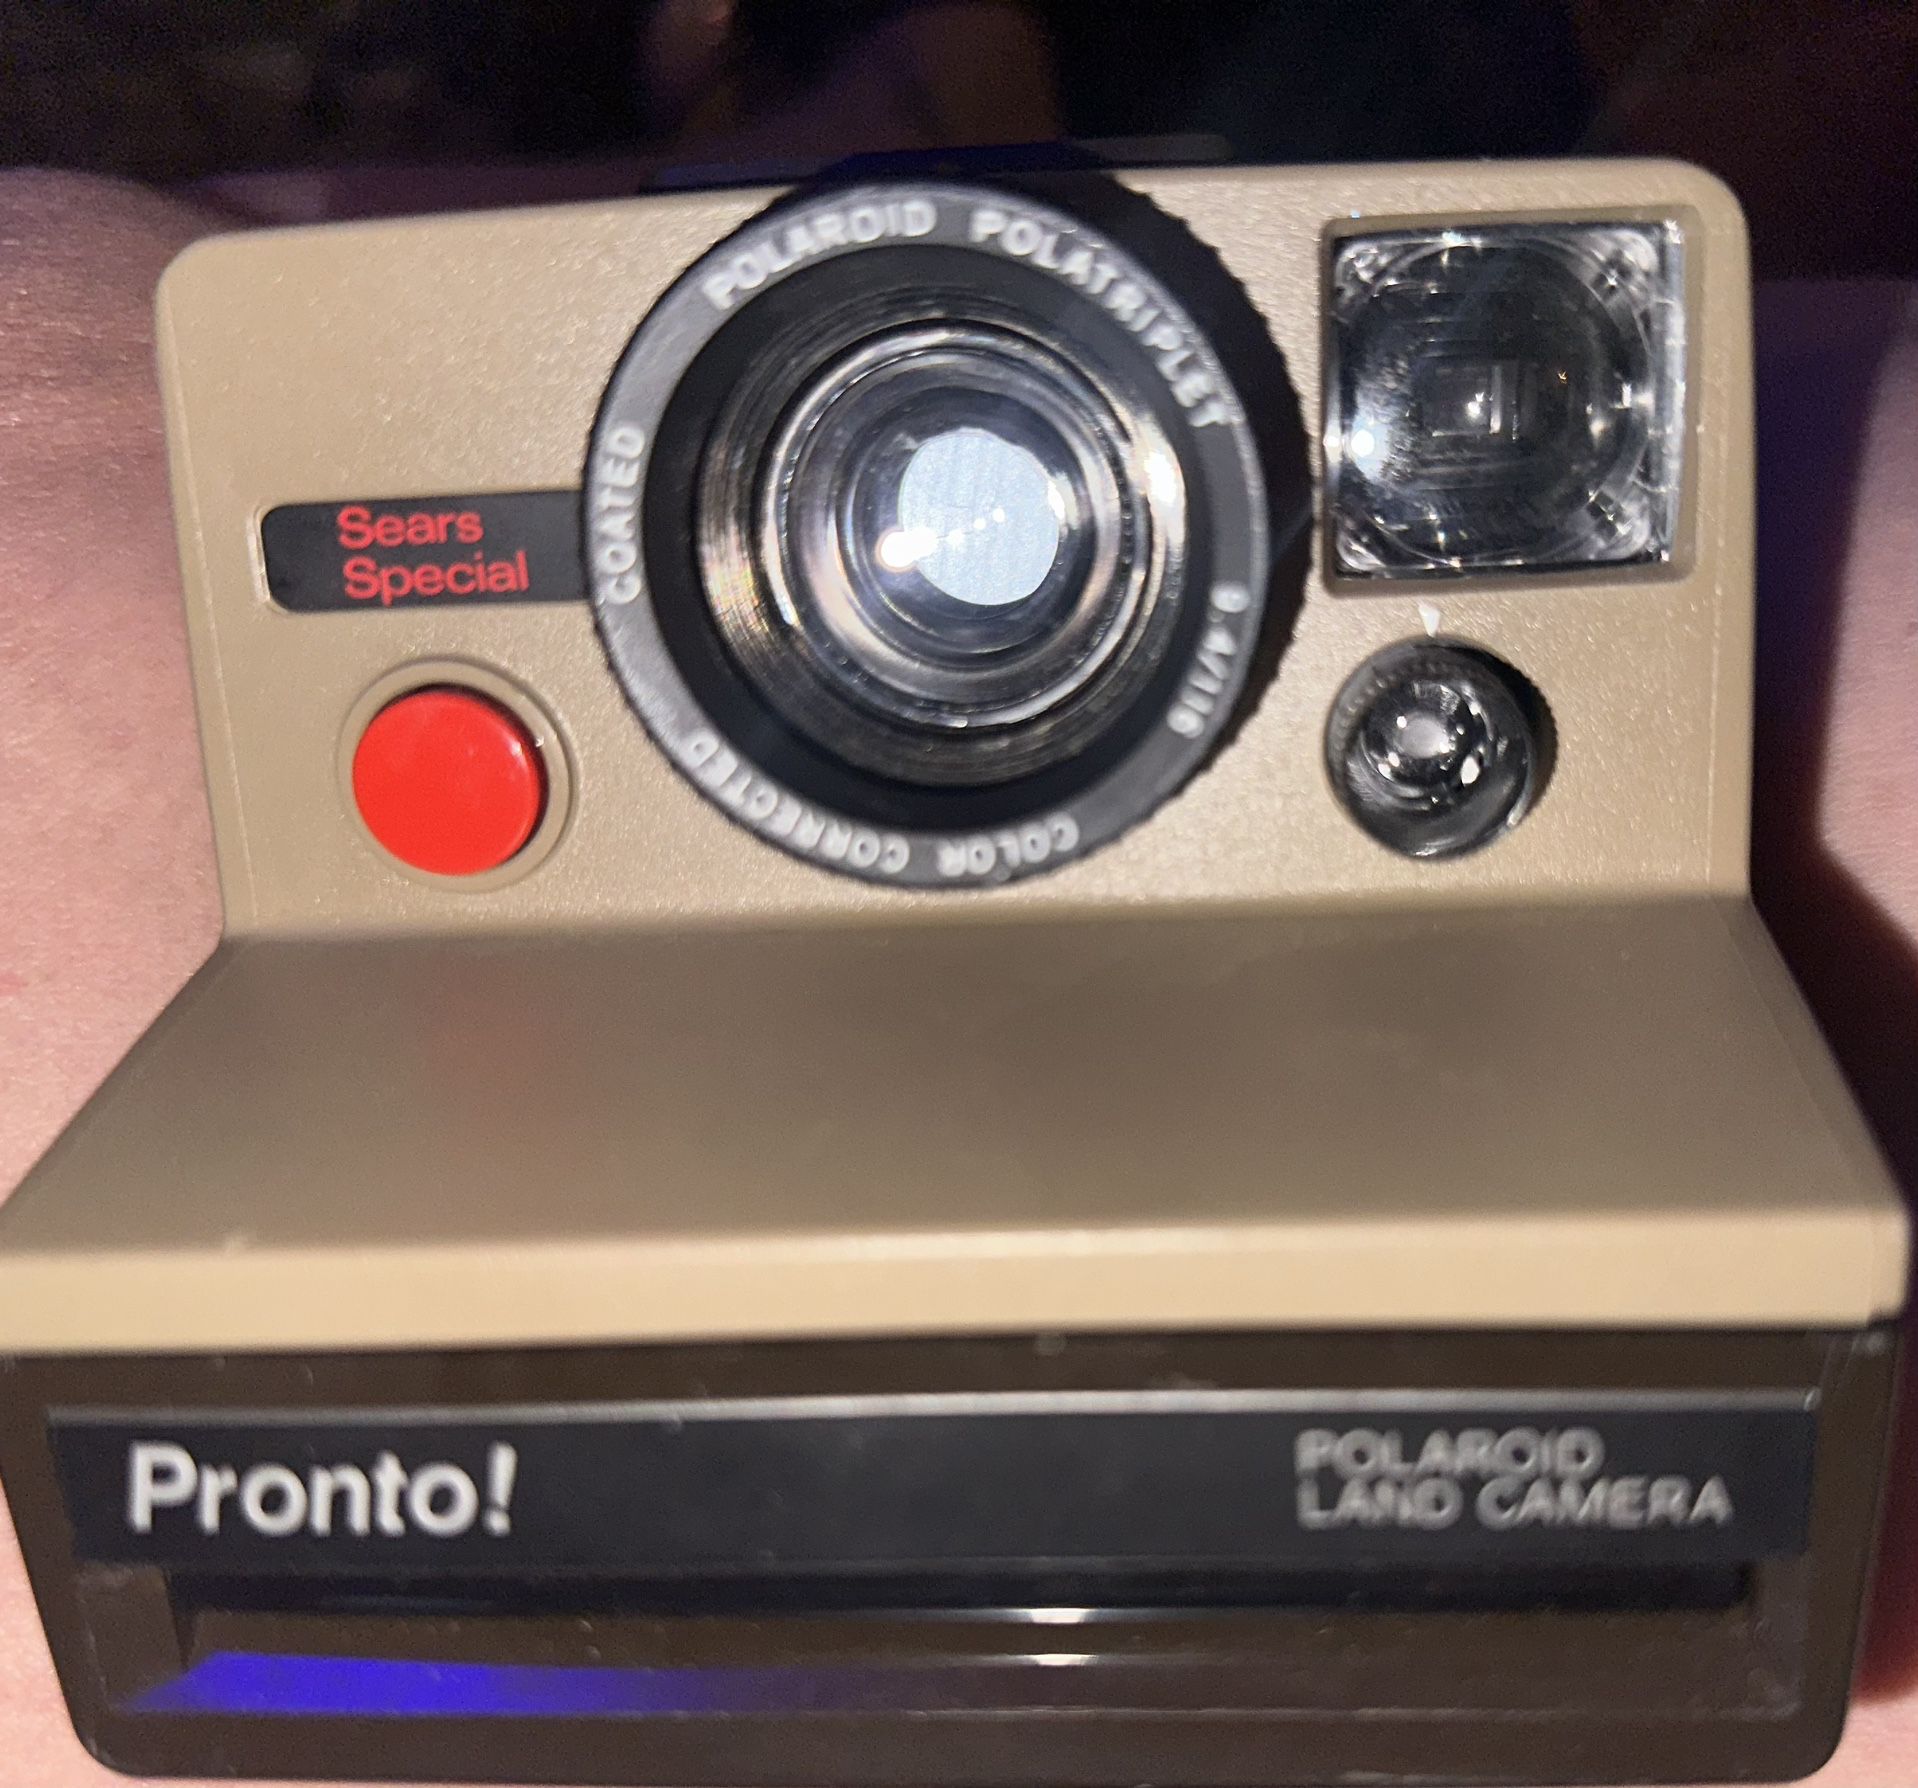 Preowned POLAROID LAND CAMERA PRONTO SEARS SPECIAL VINTAGE FROM Commercial surplus in good working condition located Off lake mead and Simmons area as